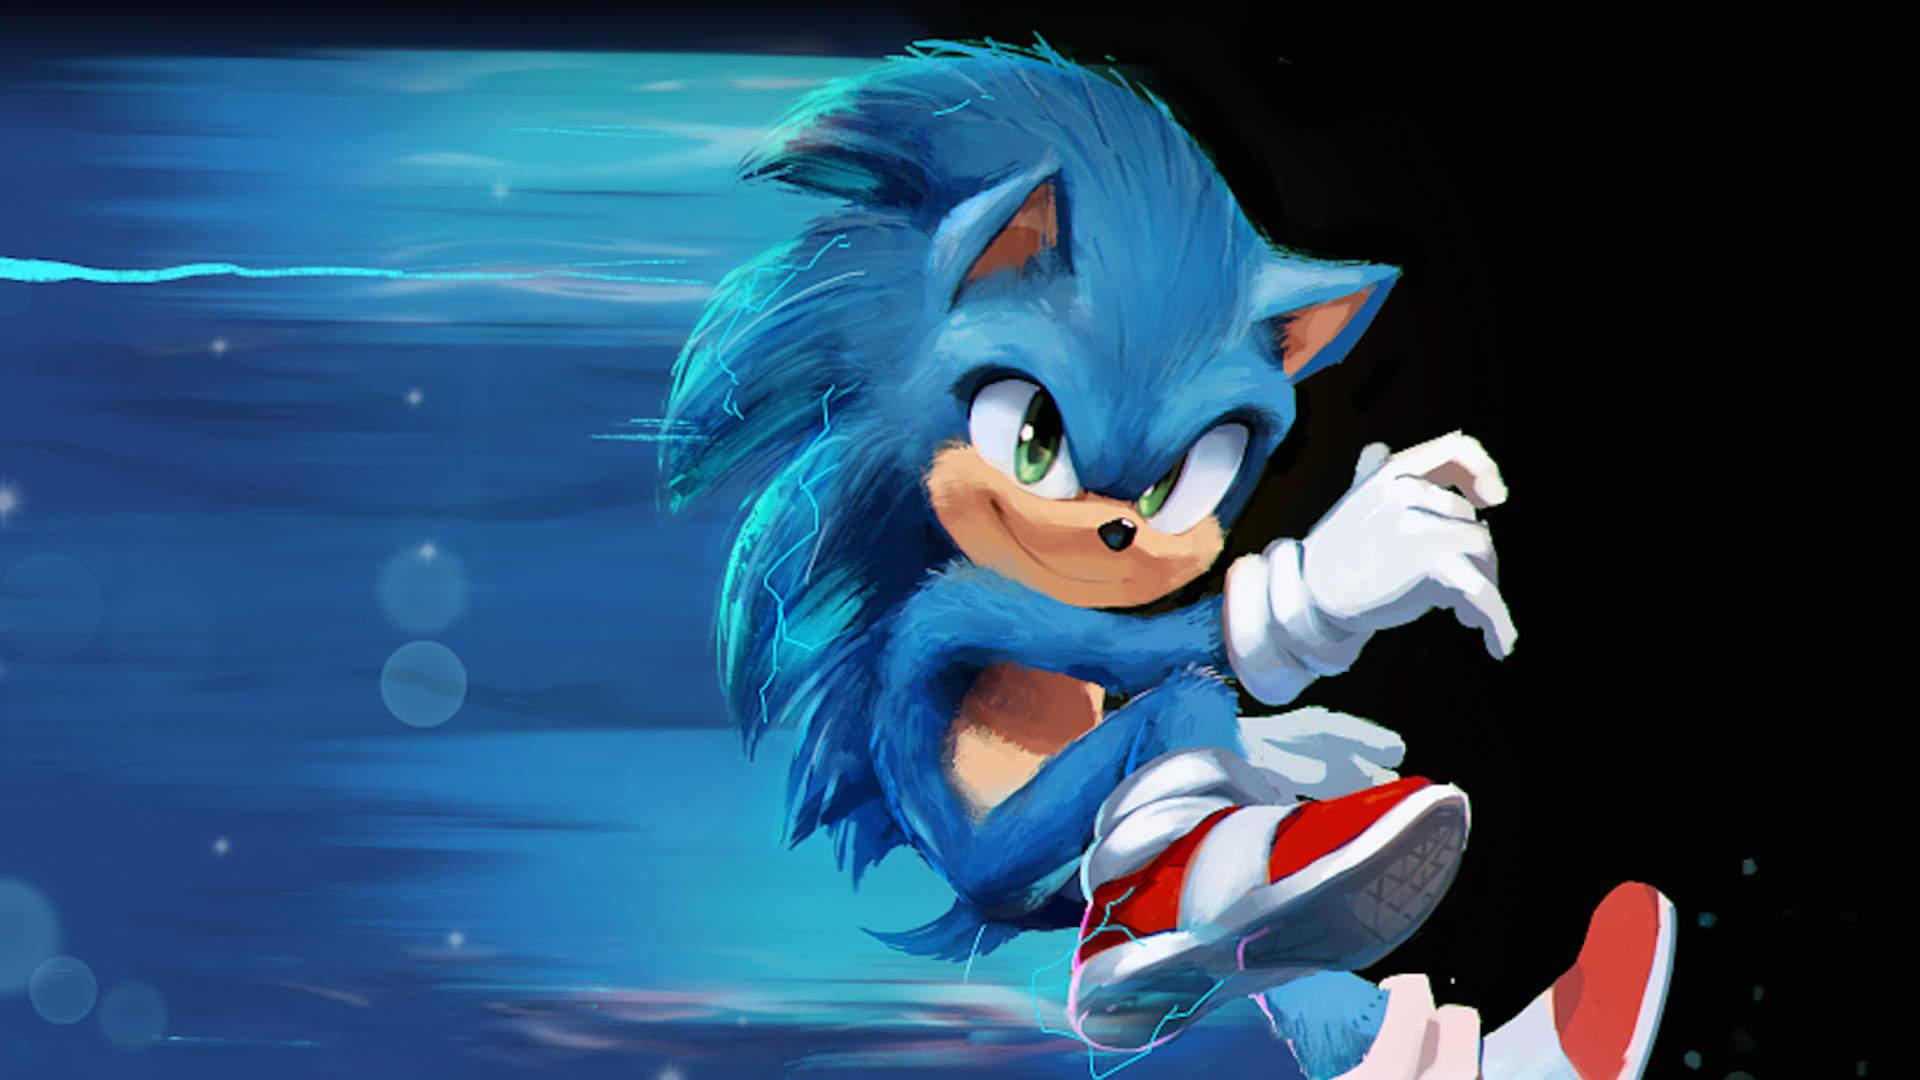 The Artist Who Led Movie Sonic's Redesign Has a Long History